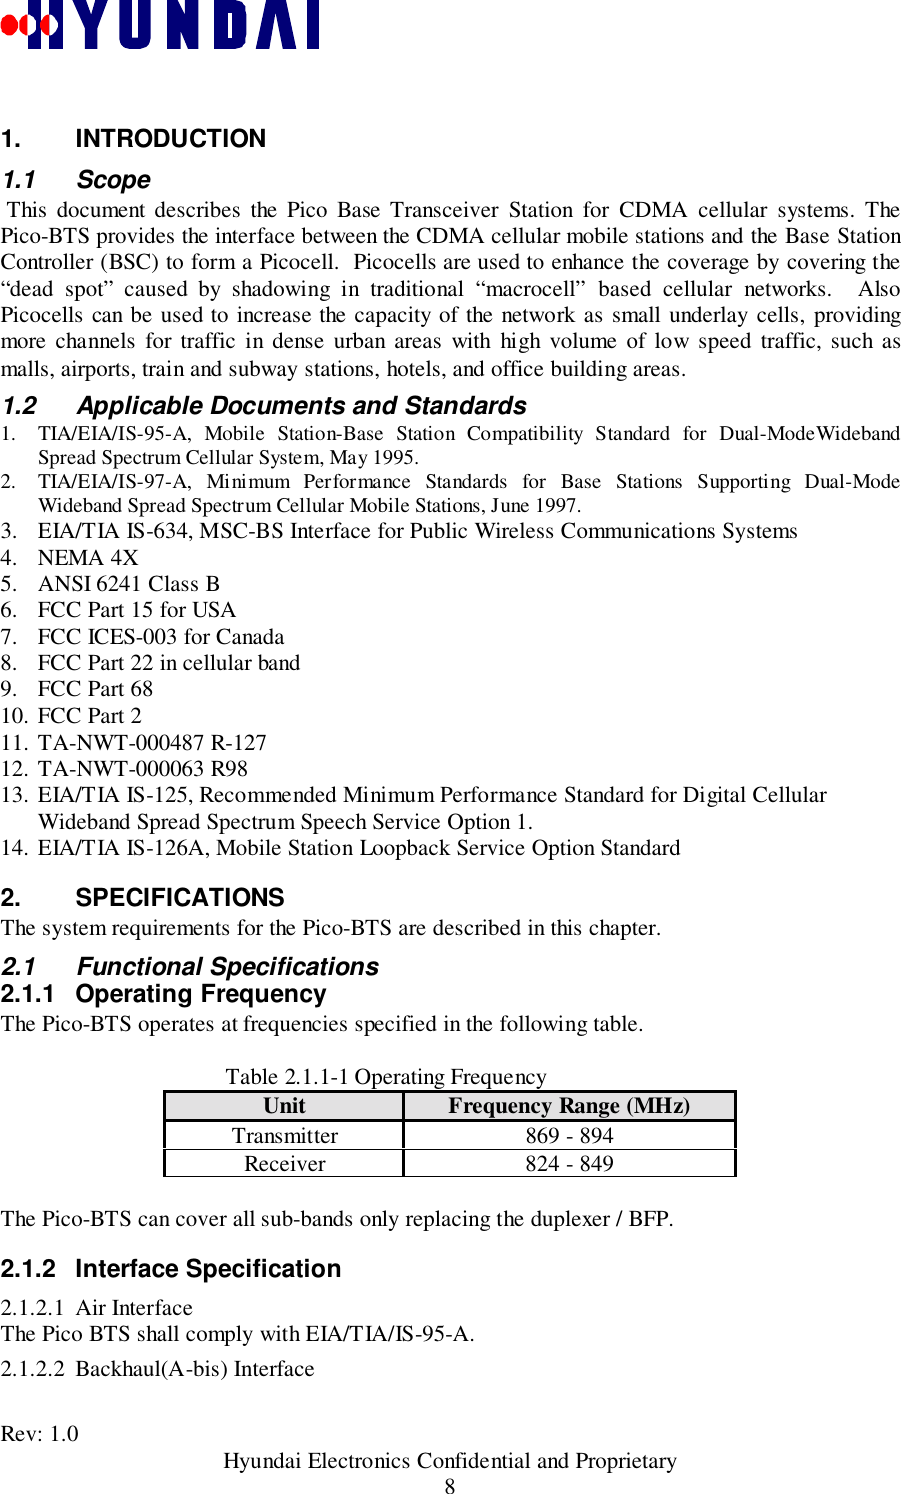 Rev: 1.0                                           Hyundai Electronics Confidential and Proprietary81. INTRODUCTION1.1 Scope This document describes the Pico Base Transceiver Station for CDMA cellular systems. ThePico-BTS provides the interface between the CDMA cellular mobile stations and the Base StationController (BSC) to form a Picocell.  Picocells are used to enhance the coverage by covering the“dead spot” caused by shadowing in traditional “macrocell” based cellular networks.  AlsoPicocells can be used to increase the capacity of the network as small underlay cells, providingmore channels for traffic in dense urban areas with high volume of low speed traffic, such asmalls, airports, train and subway stations, hotels, and office building areas.1.2  Applicable Documents and Standards1. TIA/EIA/IS-95-A, Mobile Station-Base Station Compatibility Standard for Dual-ModeWidebandSpread Spectrum Cellular System, May 1995.2. TIA/EIA/IS-97-A, Minimum Performance Standards for Base Stations Supporting Dual-ModeWideband Spread Spectrum Cellular Mobile Stations, June 1997.3. EIA/TIA IS-634, MSC-BS Interface for Public Wireless Communications Systems4. NEMA 4X5. ANSI 6241 Class B6. FCC Part 15 for USA7. FCC ICES-003 for Canada8. FCC Part 22 in cellular band9. FCC Part 6810. FCC Part 211. TA-NWT-000487 R-12712. TA-NWT-000063 R9813. EIA/TIA IS-125, Recommended Minimum Performance Standard for Digital CellularWideband Spread Spectrum Speech Service Option 1.14. EIA/TIA IS-126A, Mobile Station Loopback Service Option Standard2. SPECIFICATIONSThe system requirements for the Pico-BTS are described in this chapter.2.1 Functional Specifications2.1.1 Operating FrequencyThe Pico-BTS operates at frequencies specified in the following table.Table 2.1.1-1 Operating FrequencyUnit Frequency Range (MHz)Transmitter 869 - 894Receiver 824 - 849The Pico-BTS can cover all sub-bands only replacing the duplexer / BFP.2.1.2 Interface Specification2.1.2.1 Air InterfaceThe Pico BTS shall comply with EIA/TIA/IS-95-A.2.1.2.2 Backhaul(A-bis) Interface